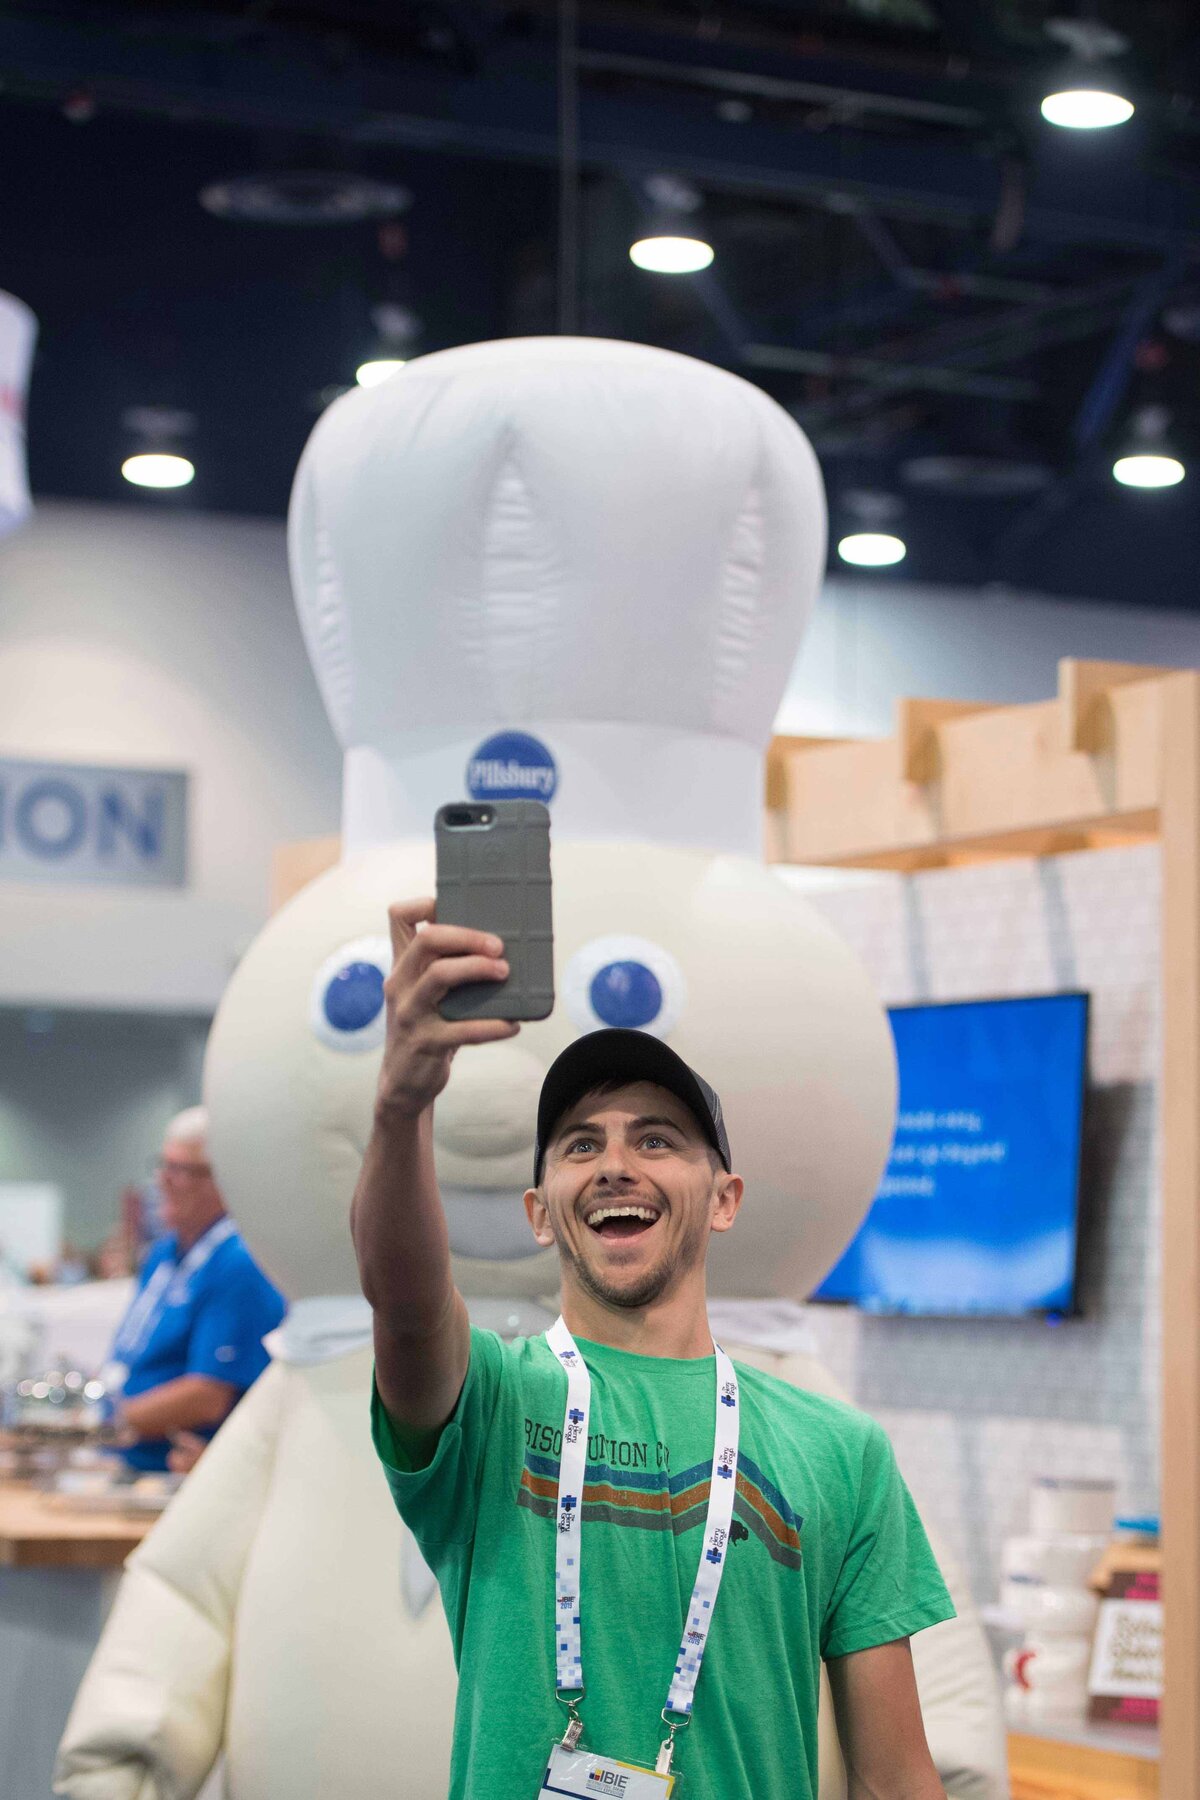 Attendee excitedly takes selfie in front of  Pilsbury Dough Boy  manikin at interesting sales booth